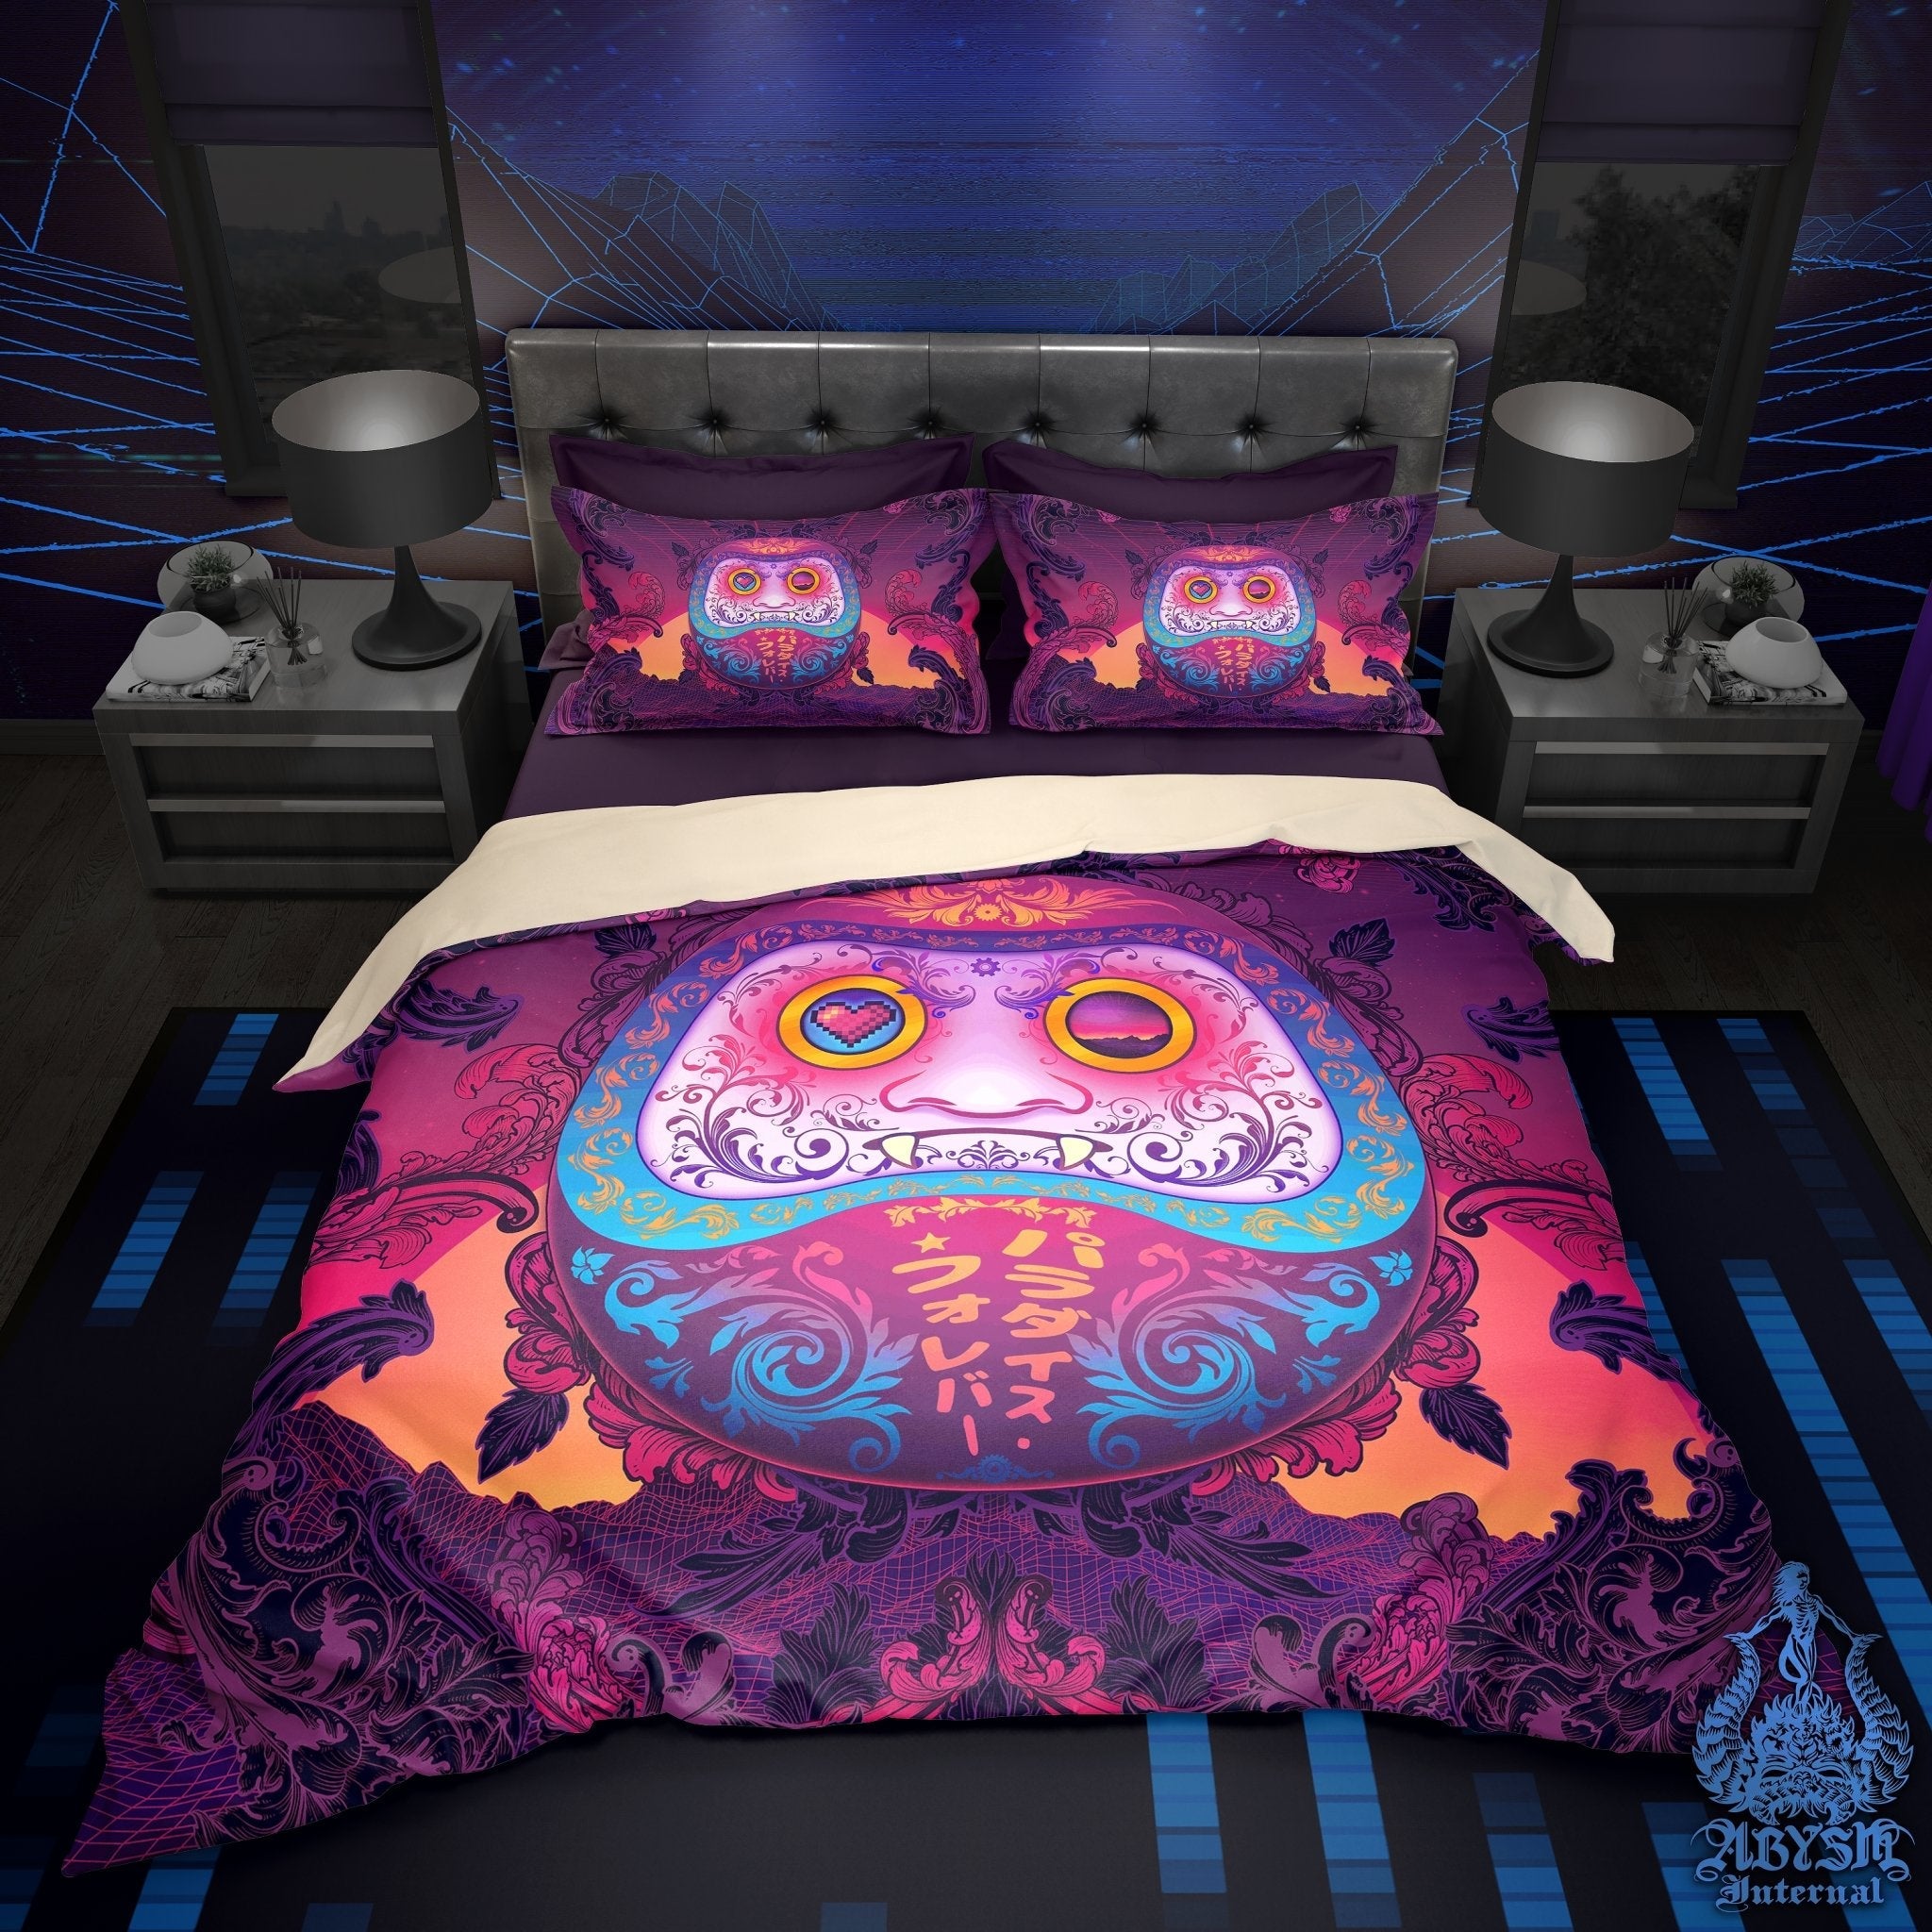 Japanese Vaporwave Bedding Set, Comforter and Duvet, Anime Bed Cover and Retrowave Bedroom Decor, King, Queen and Twin Size, Psychedelic Synthwave, 80s Gamer Room Art - Daruma - Abysm Internal